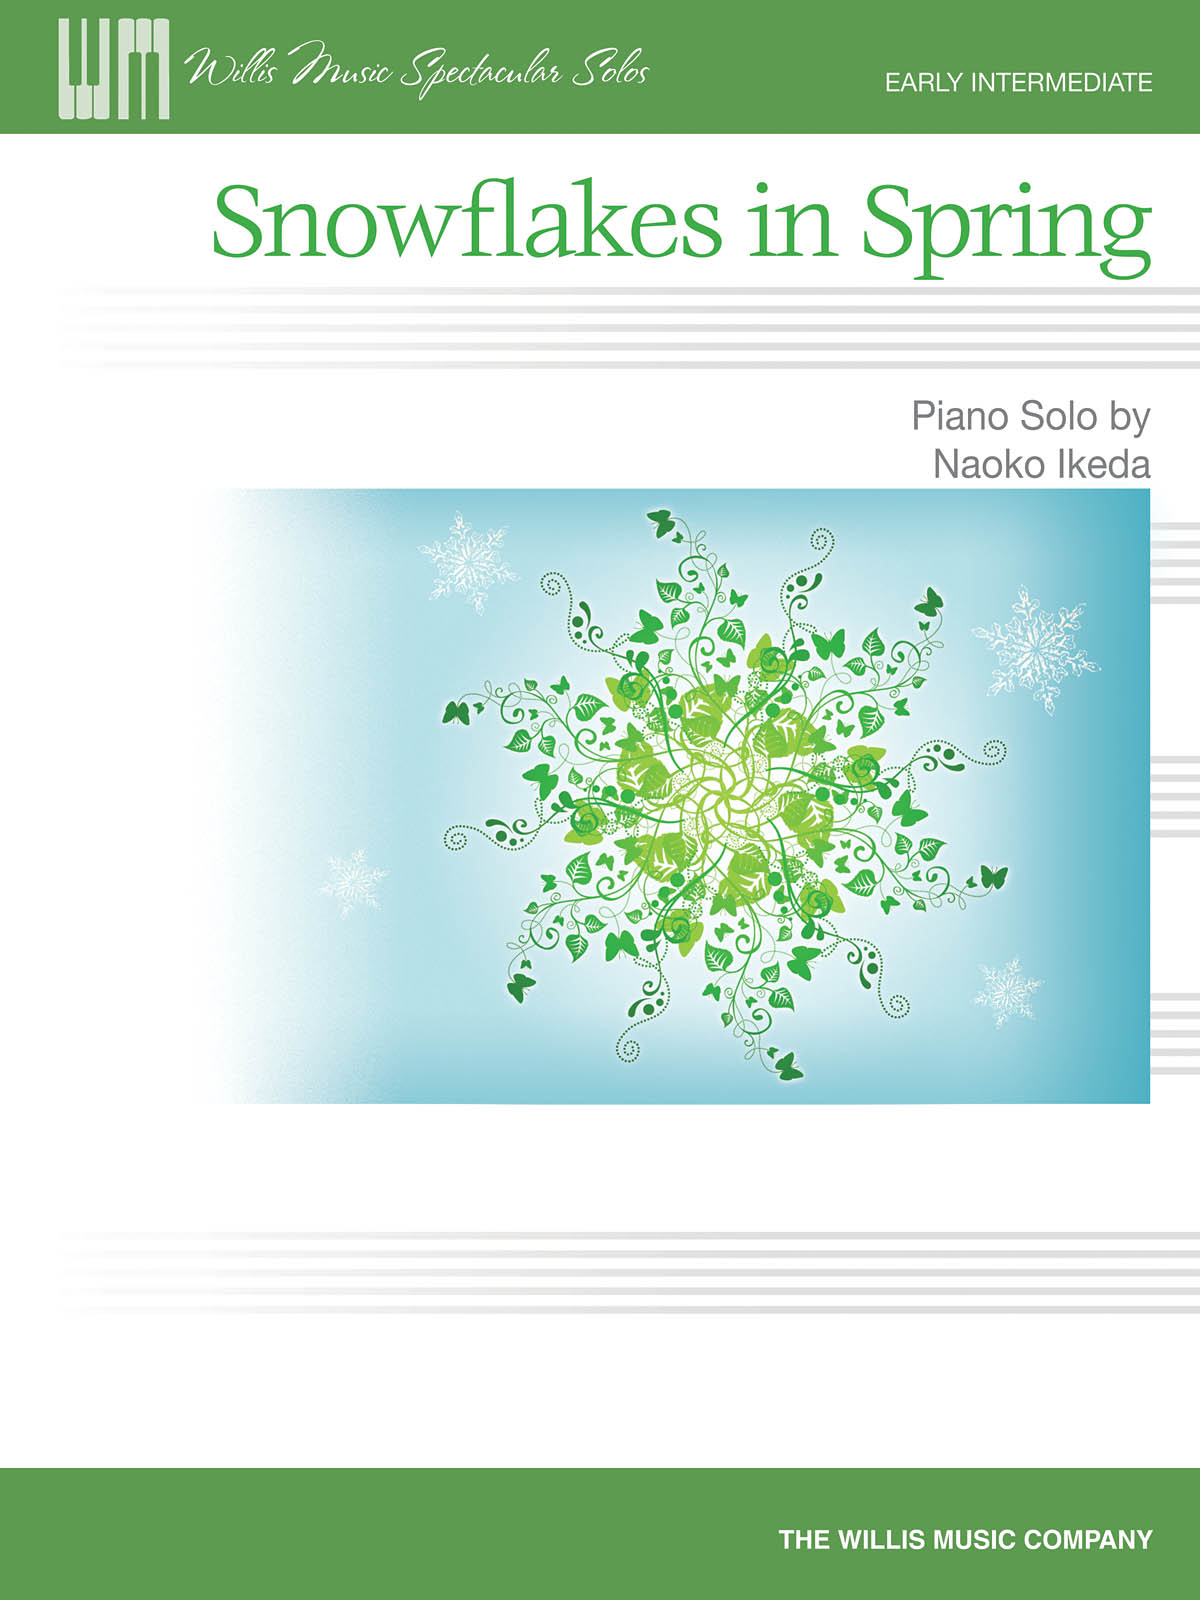 Snowflakes in Spring